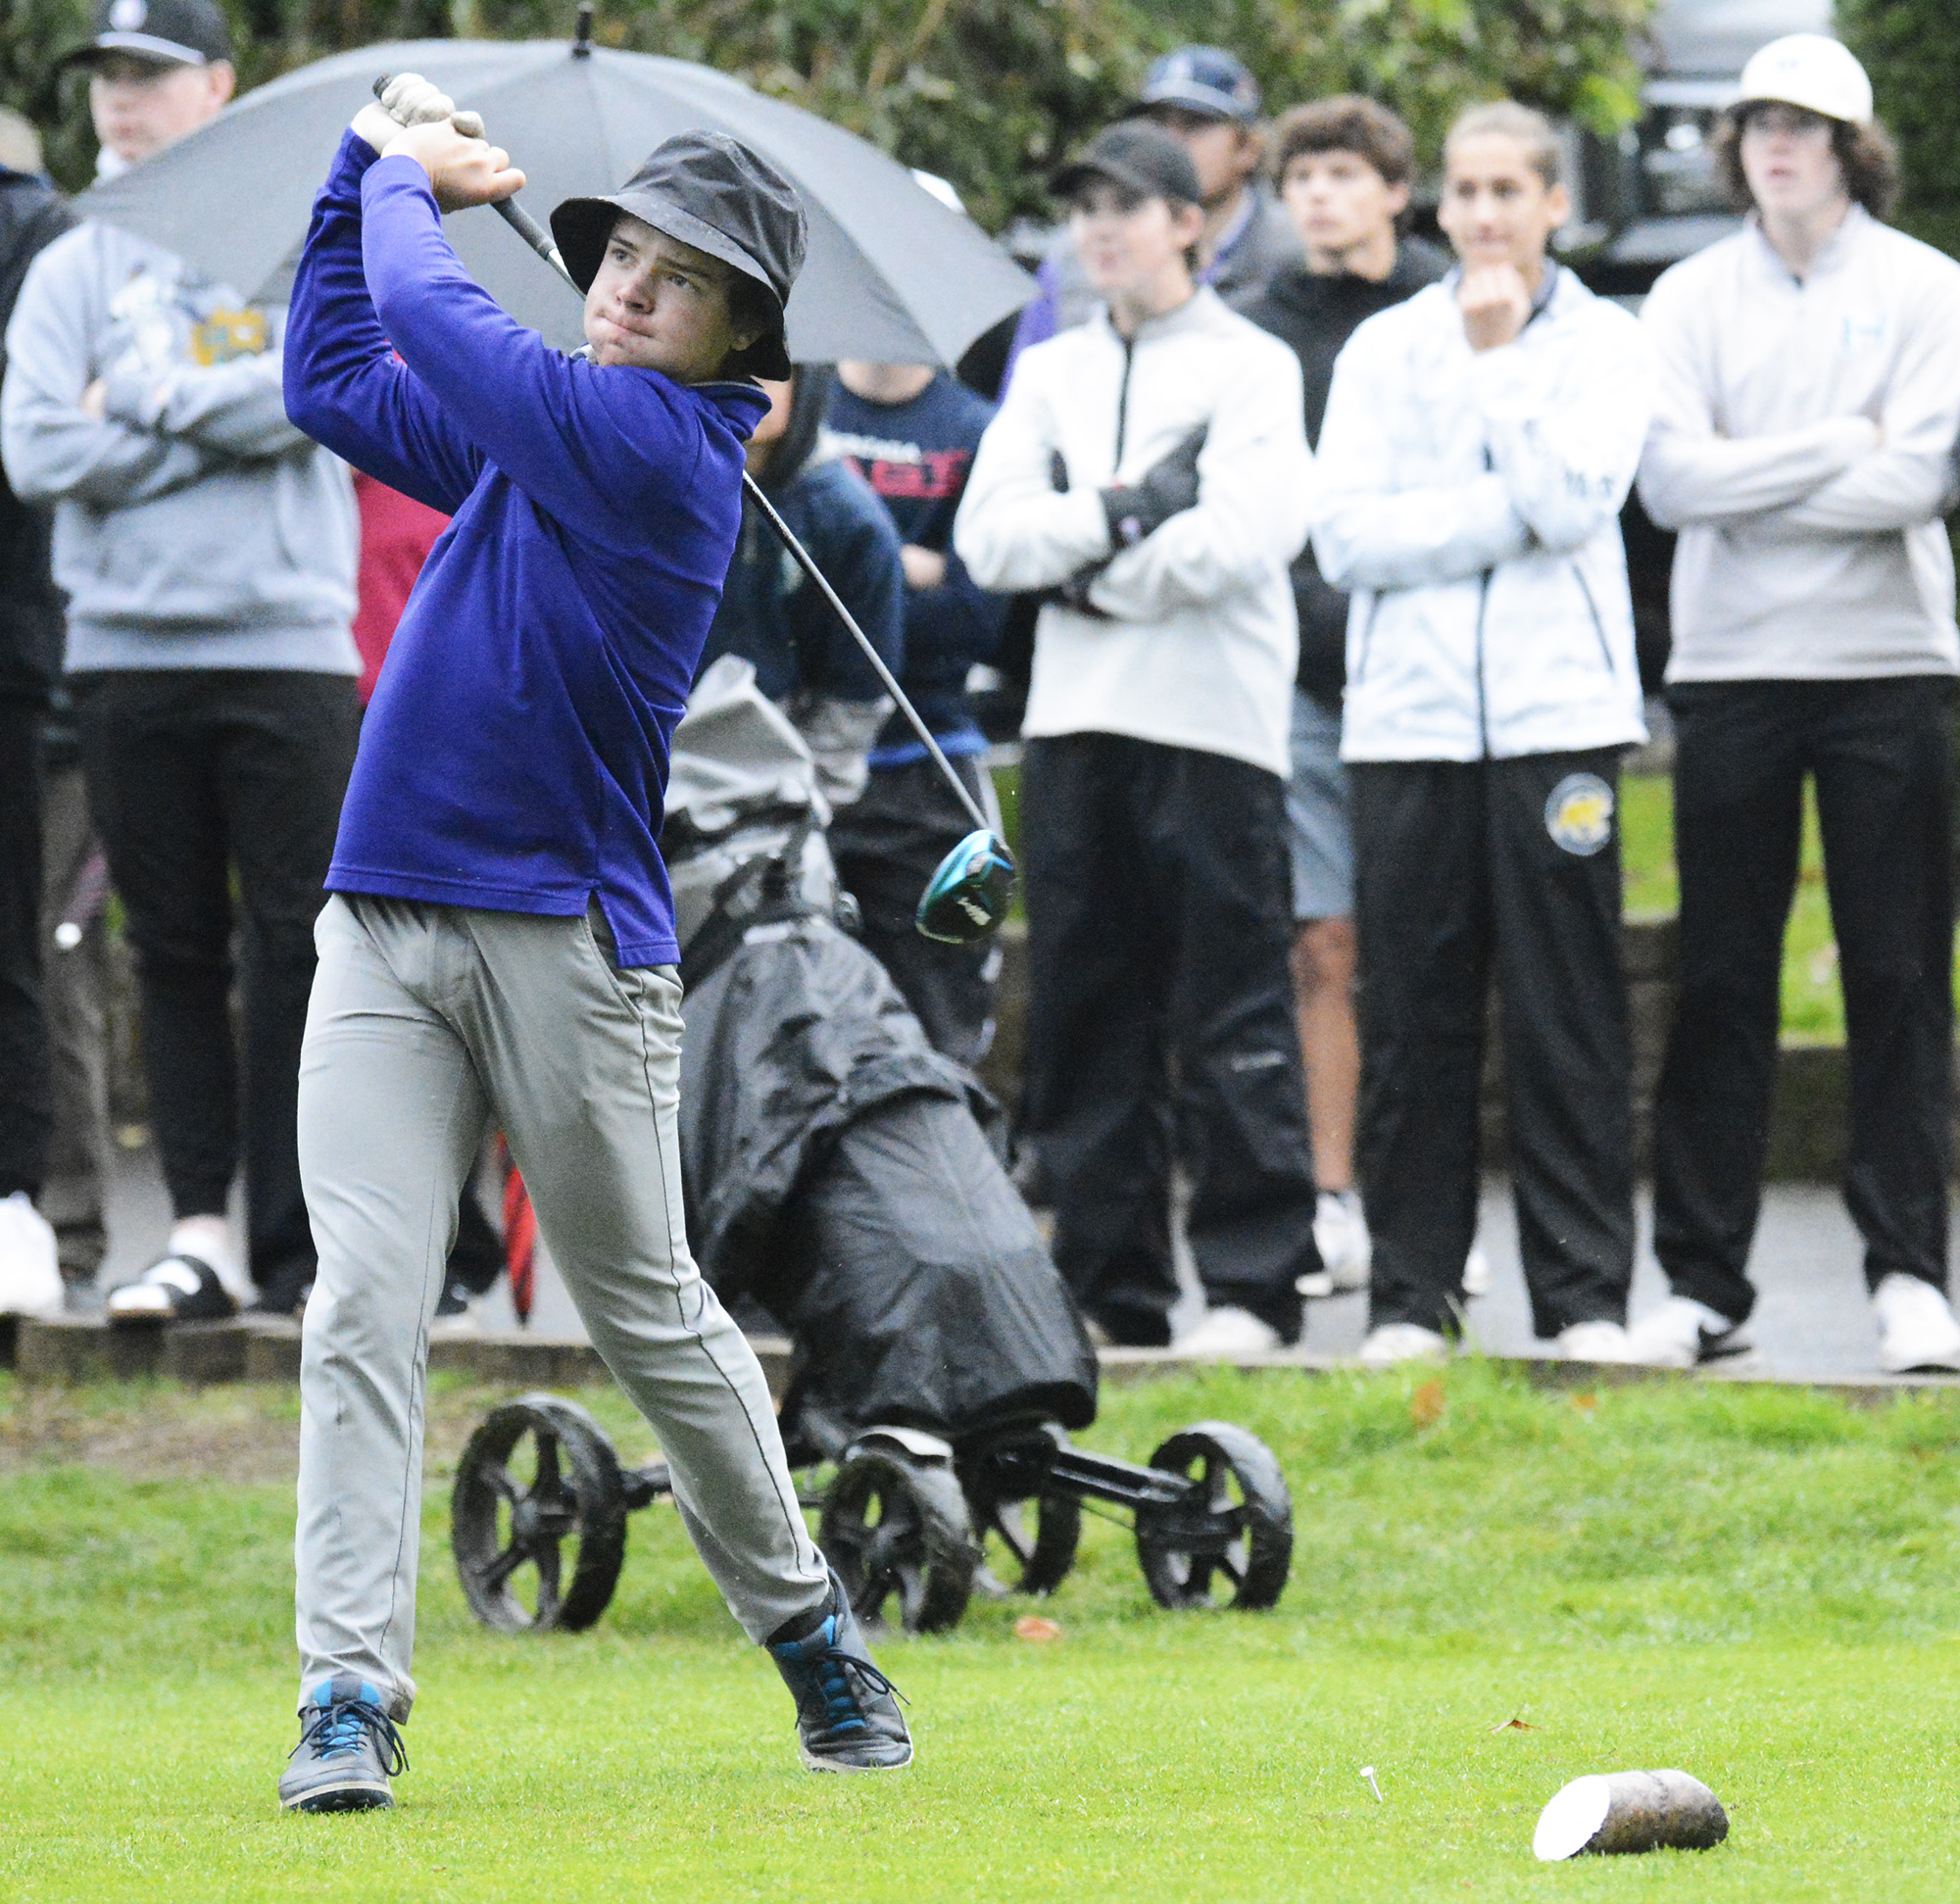 Columbia River’s Noah Larson hits his drive on the No. 1 hole at Orchard Hills Golf Club in Washougal during a playoff at the Class 2A District 4 golf tournament on Tuesday, Oct.